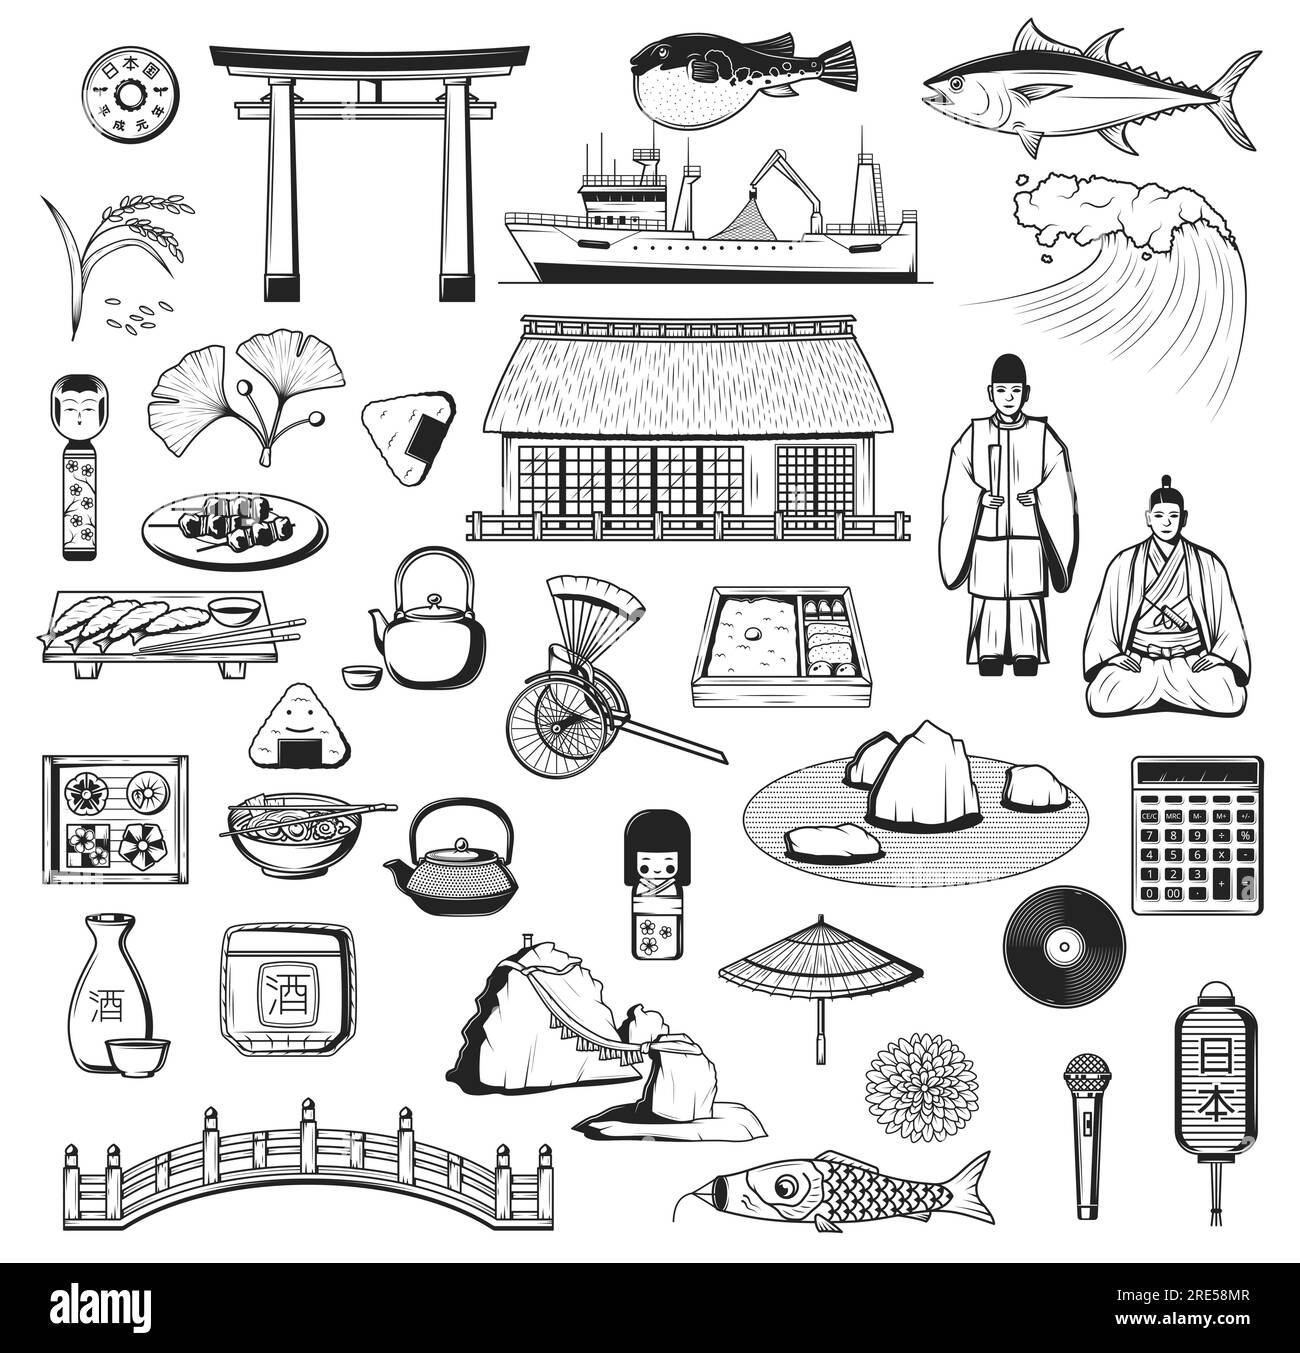 Japanese vector icons with culture, travel and food symbols of Japan. Pagoda, fish and lantern sketches, sake, sushi and umbrella, tea ceremony, torii gate and rice, bridge, wave, carp and samurai Stock Vector